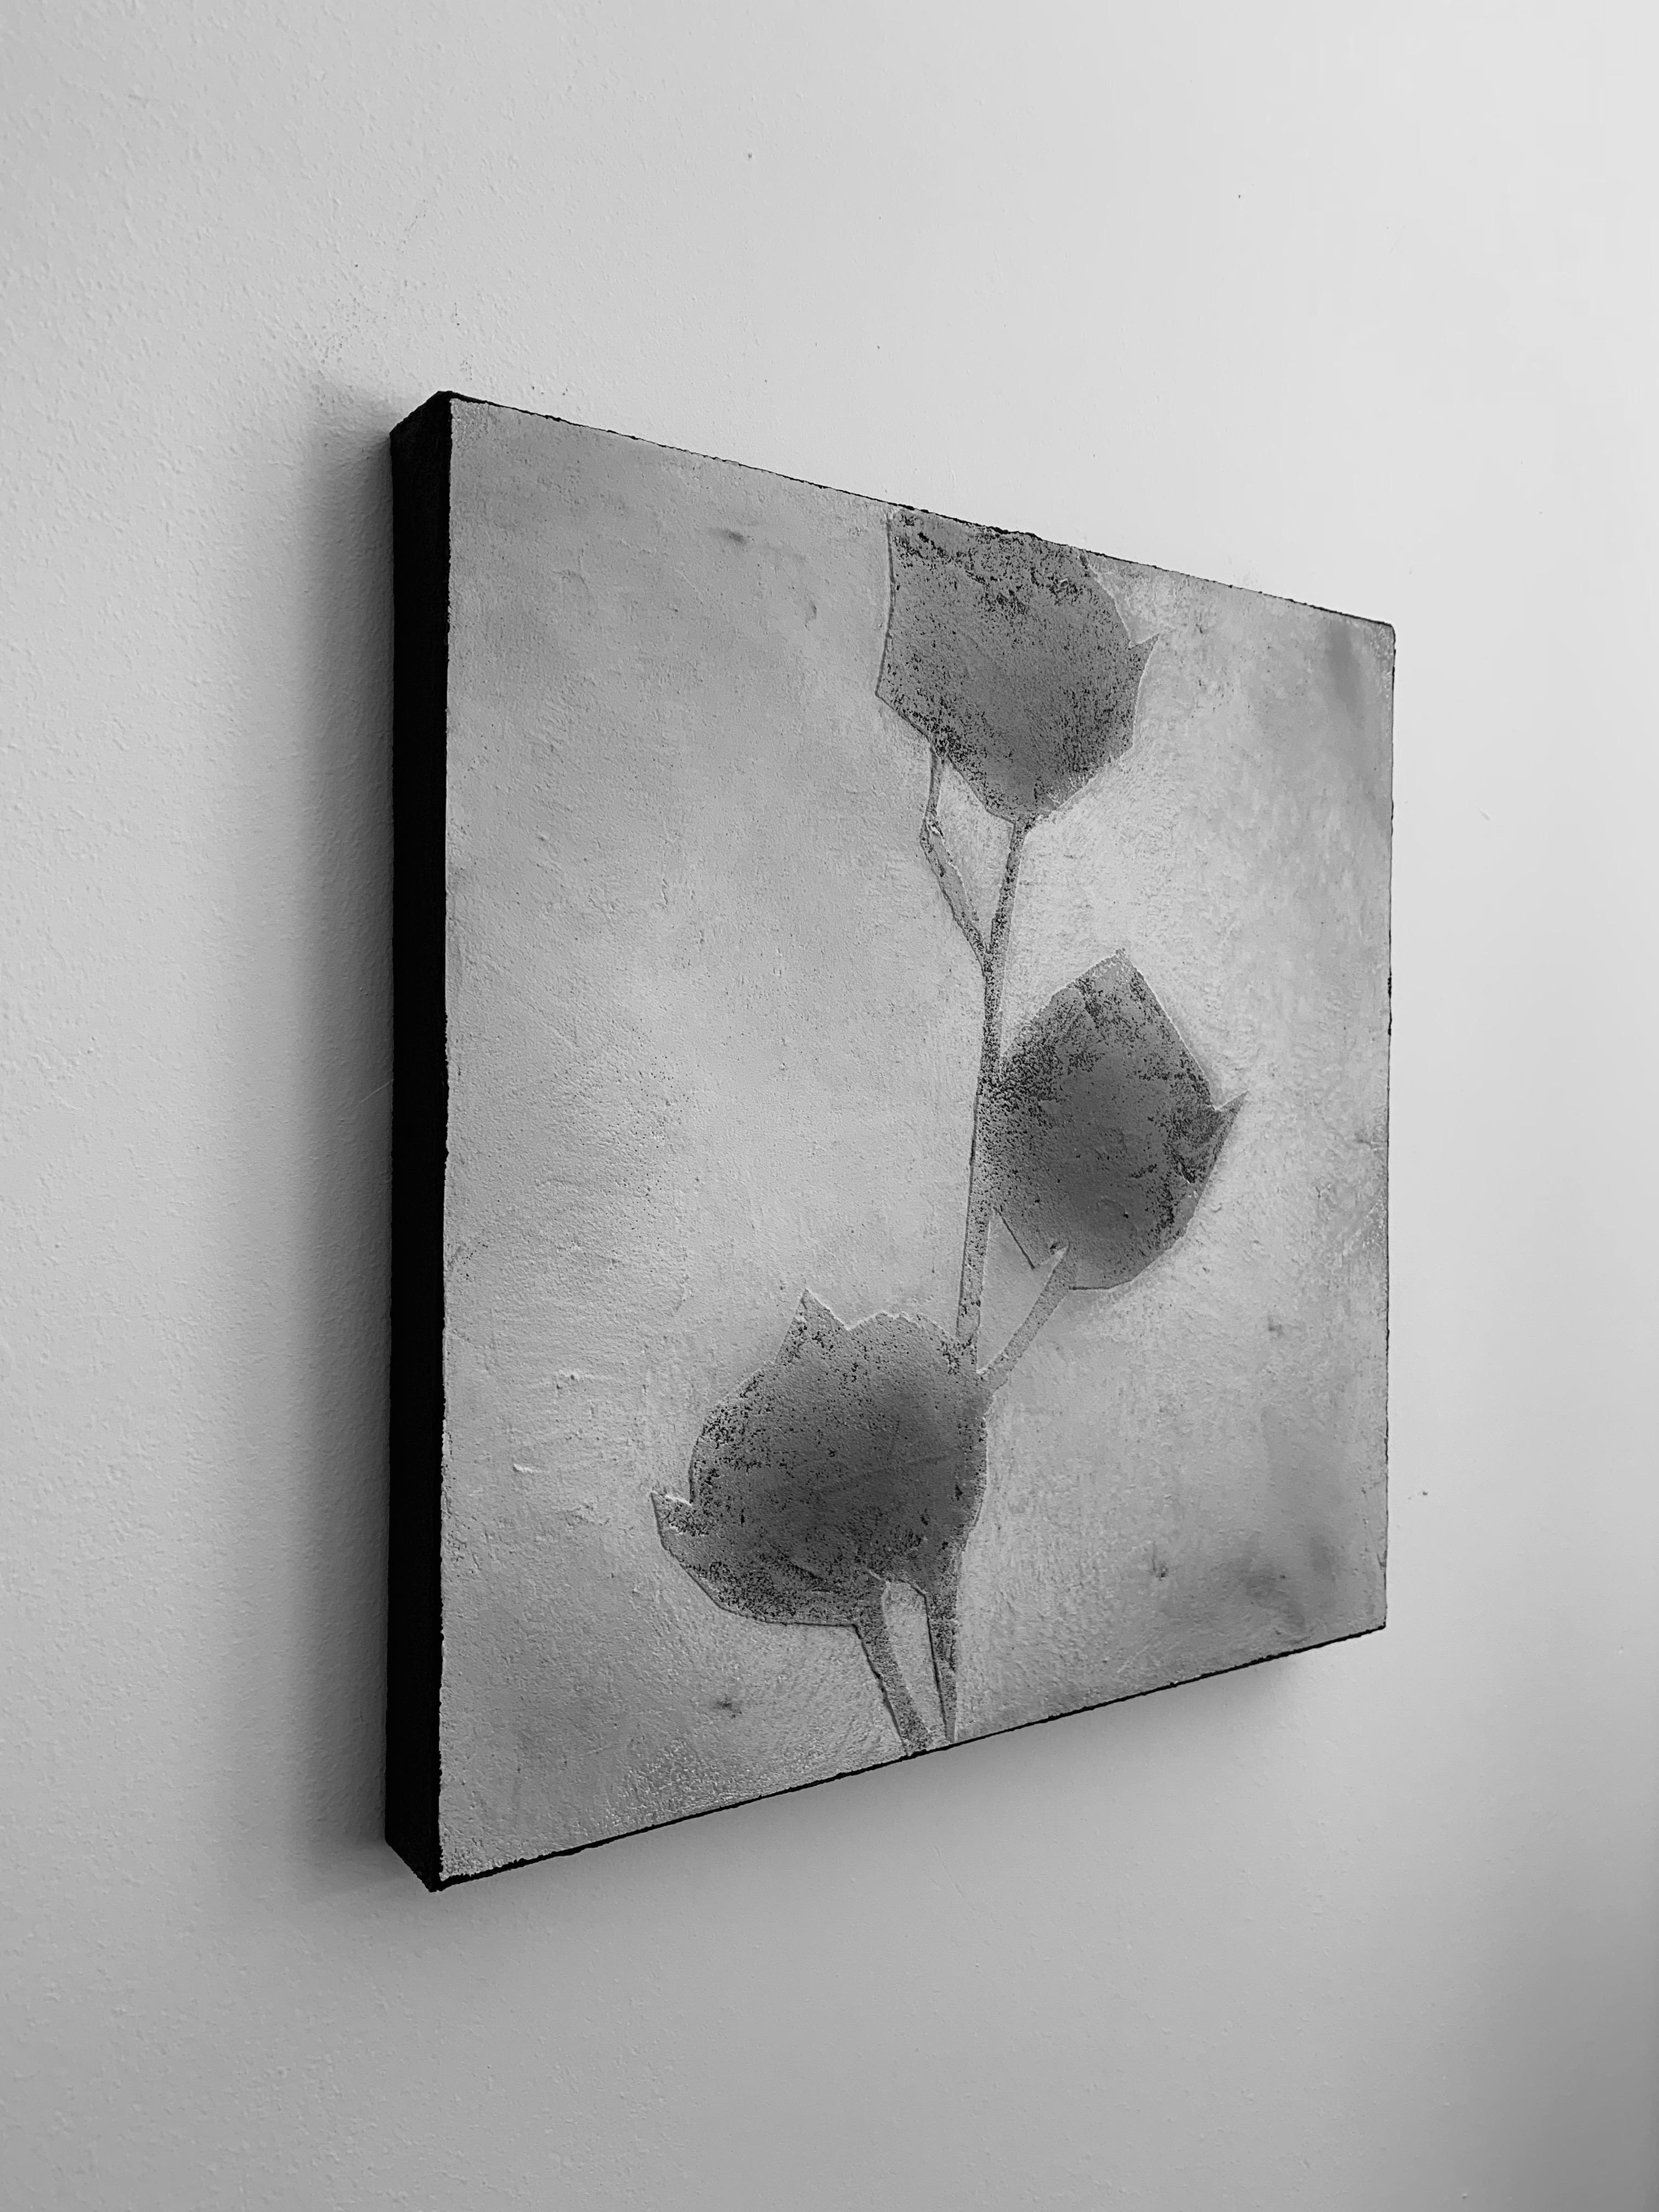 Meet this textured painting on deep-edge canvas.

Hung between 2D and 3D dimensions, the painting has a sculptured volume of main composition elements. This is created by layers by layers of own development sandy paste.

A mystical smooth effect is